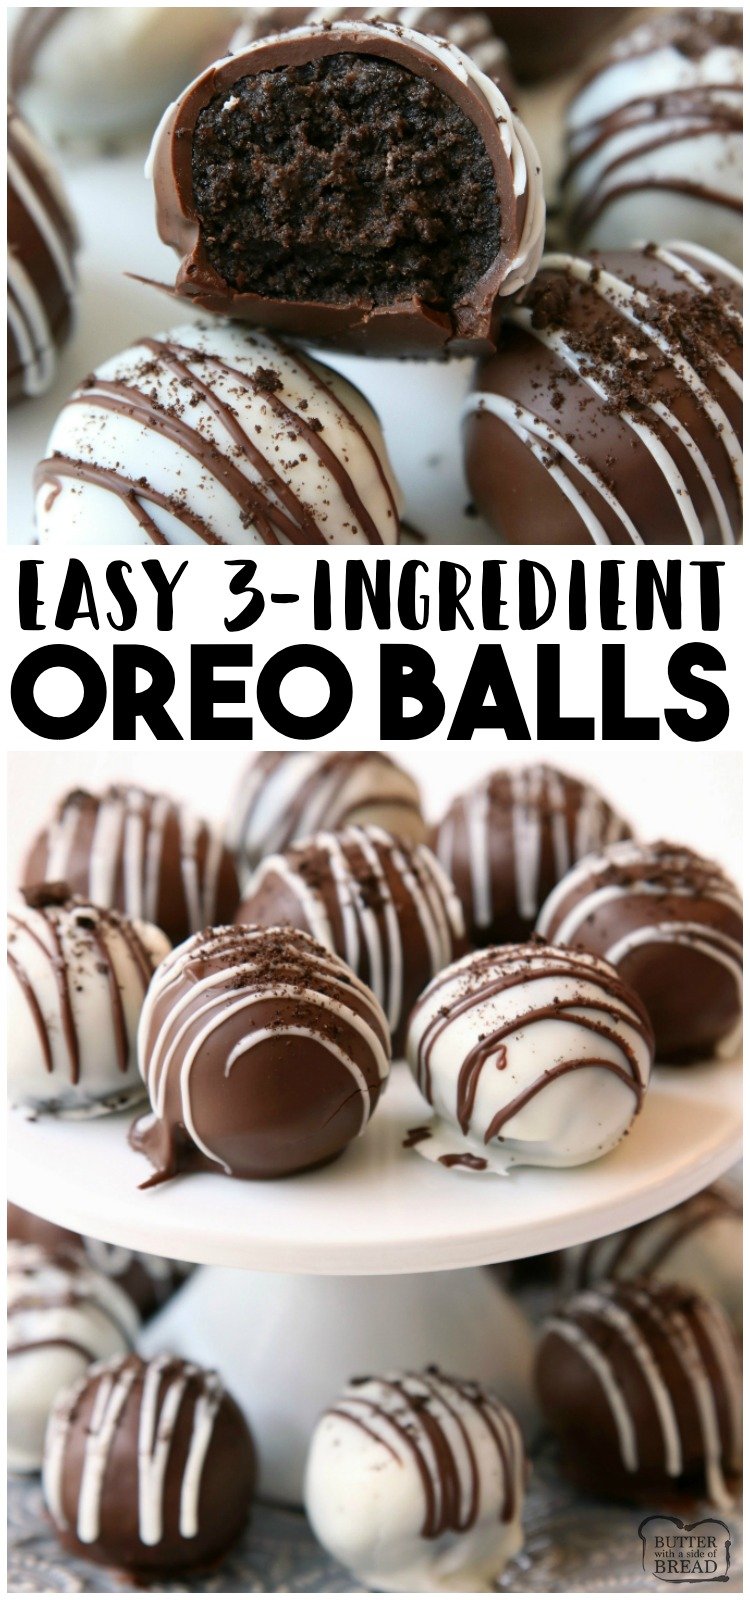 Oreo Balls made with just 3 ingredients & perfect easy dessert! Oreo Truffles made in minutes and so delicious, no one can guess they’re made with Oreo cookies! #oreo #truffles #easy #dessert #chocolate #recipe from BUTTER WITH A SIDE OF BREAD